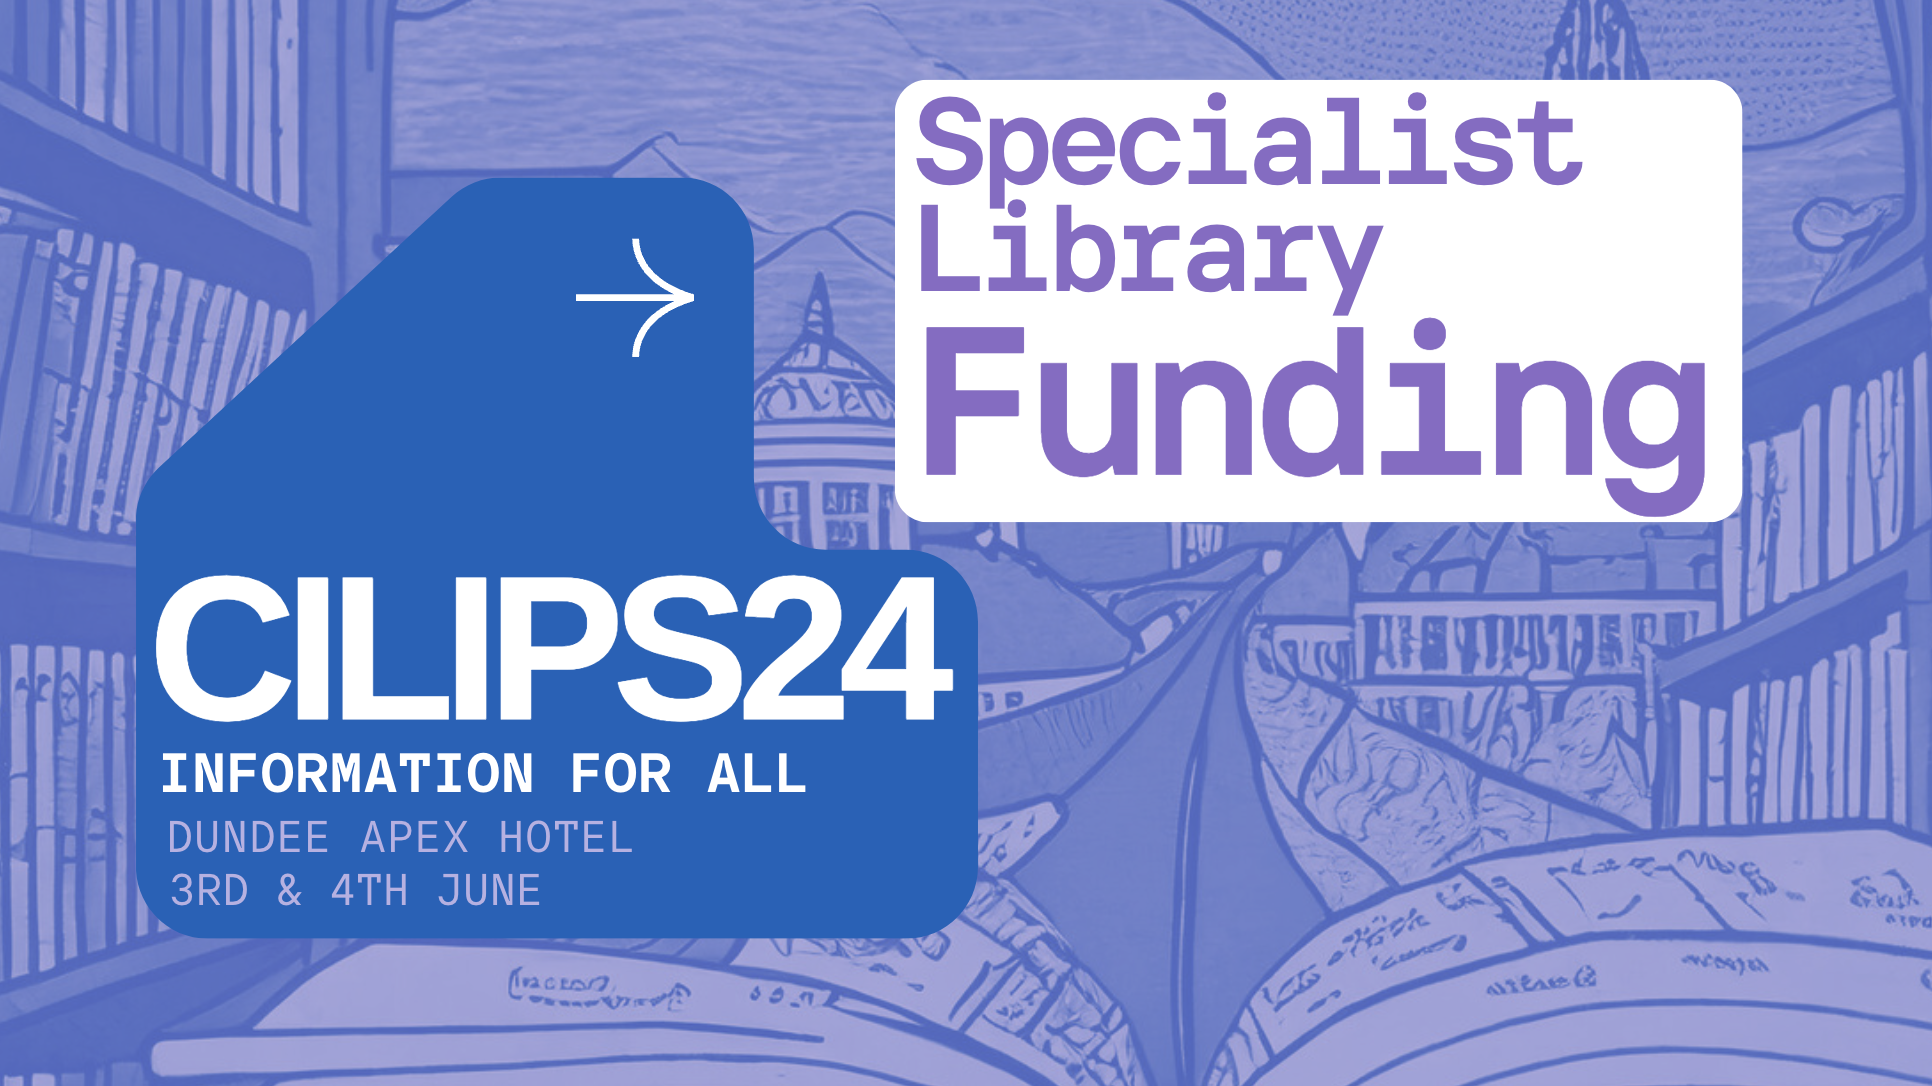 Specialist Library Funding for #CILIPS24. Information for all, Dundee Apex Hotel. 3rd and 4th June 2024.